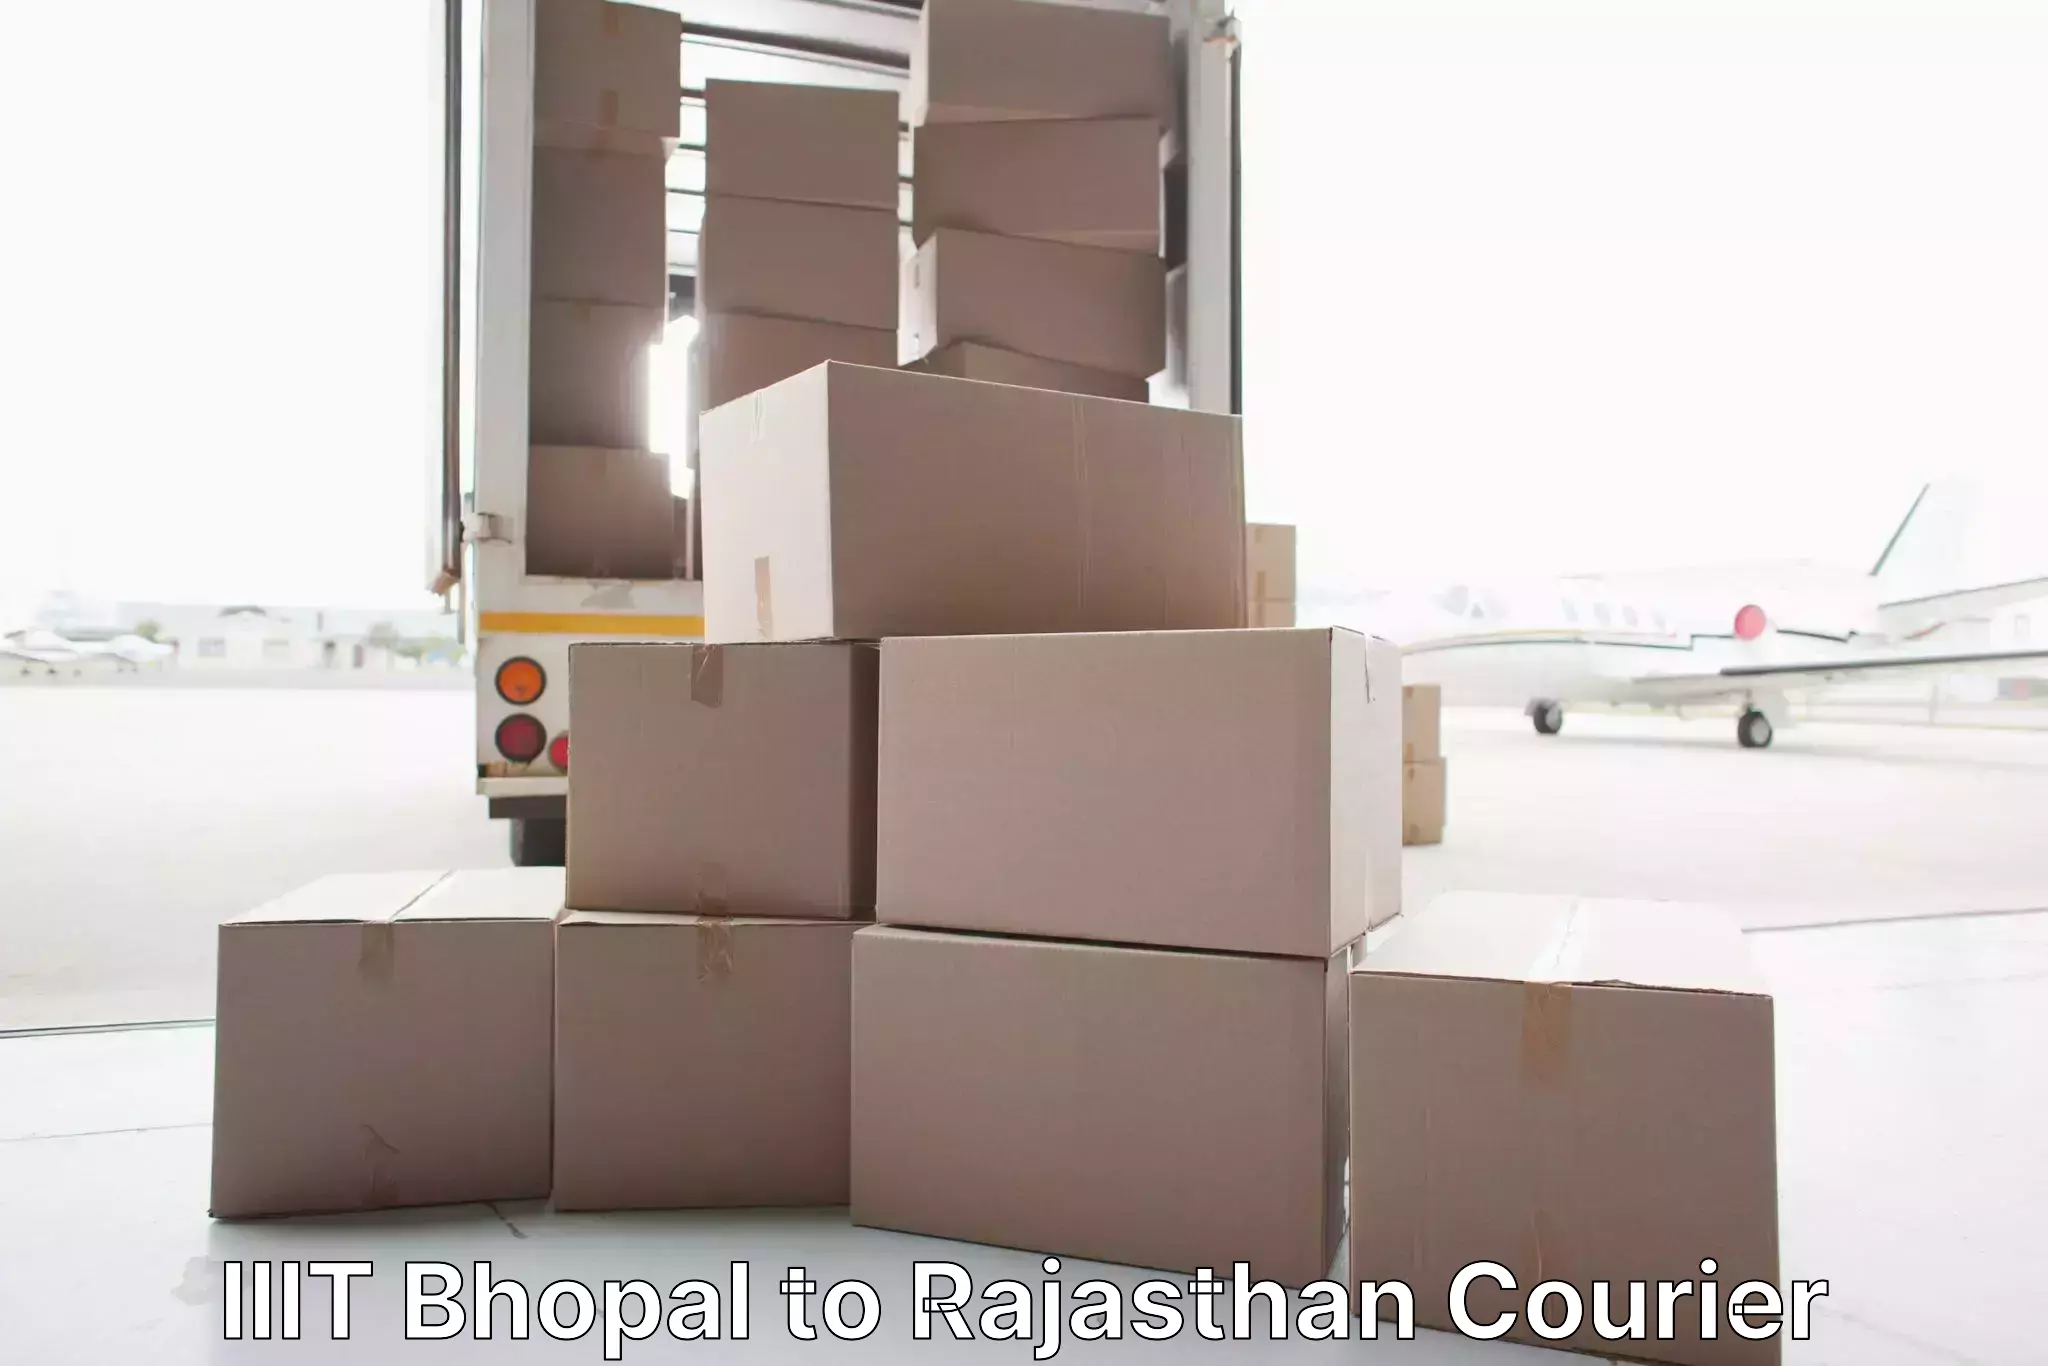 Furniture delivery service IIIT Bhopal to Hanumangarh